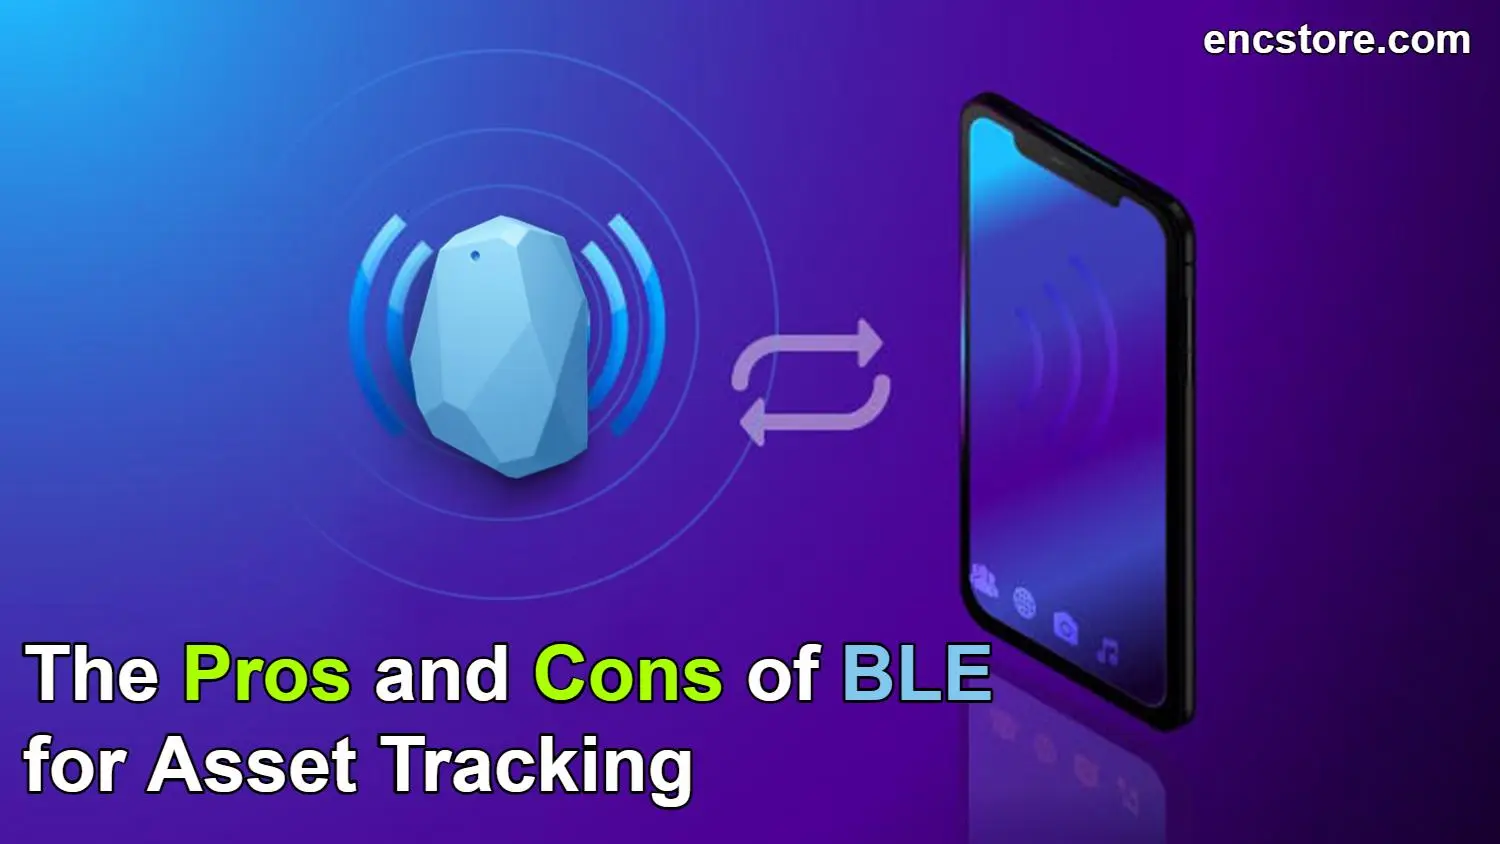  BLE for Asset Tracking